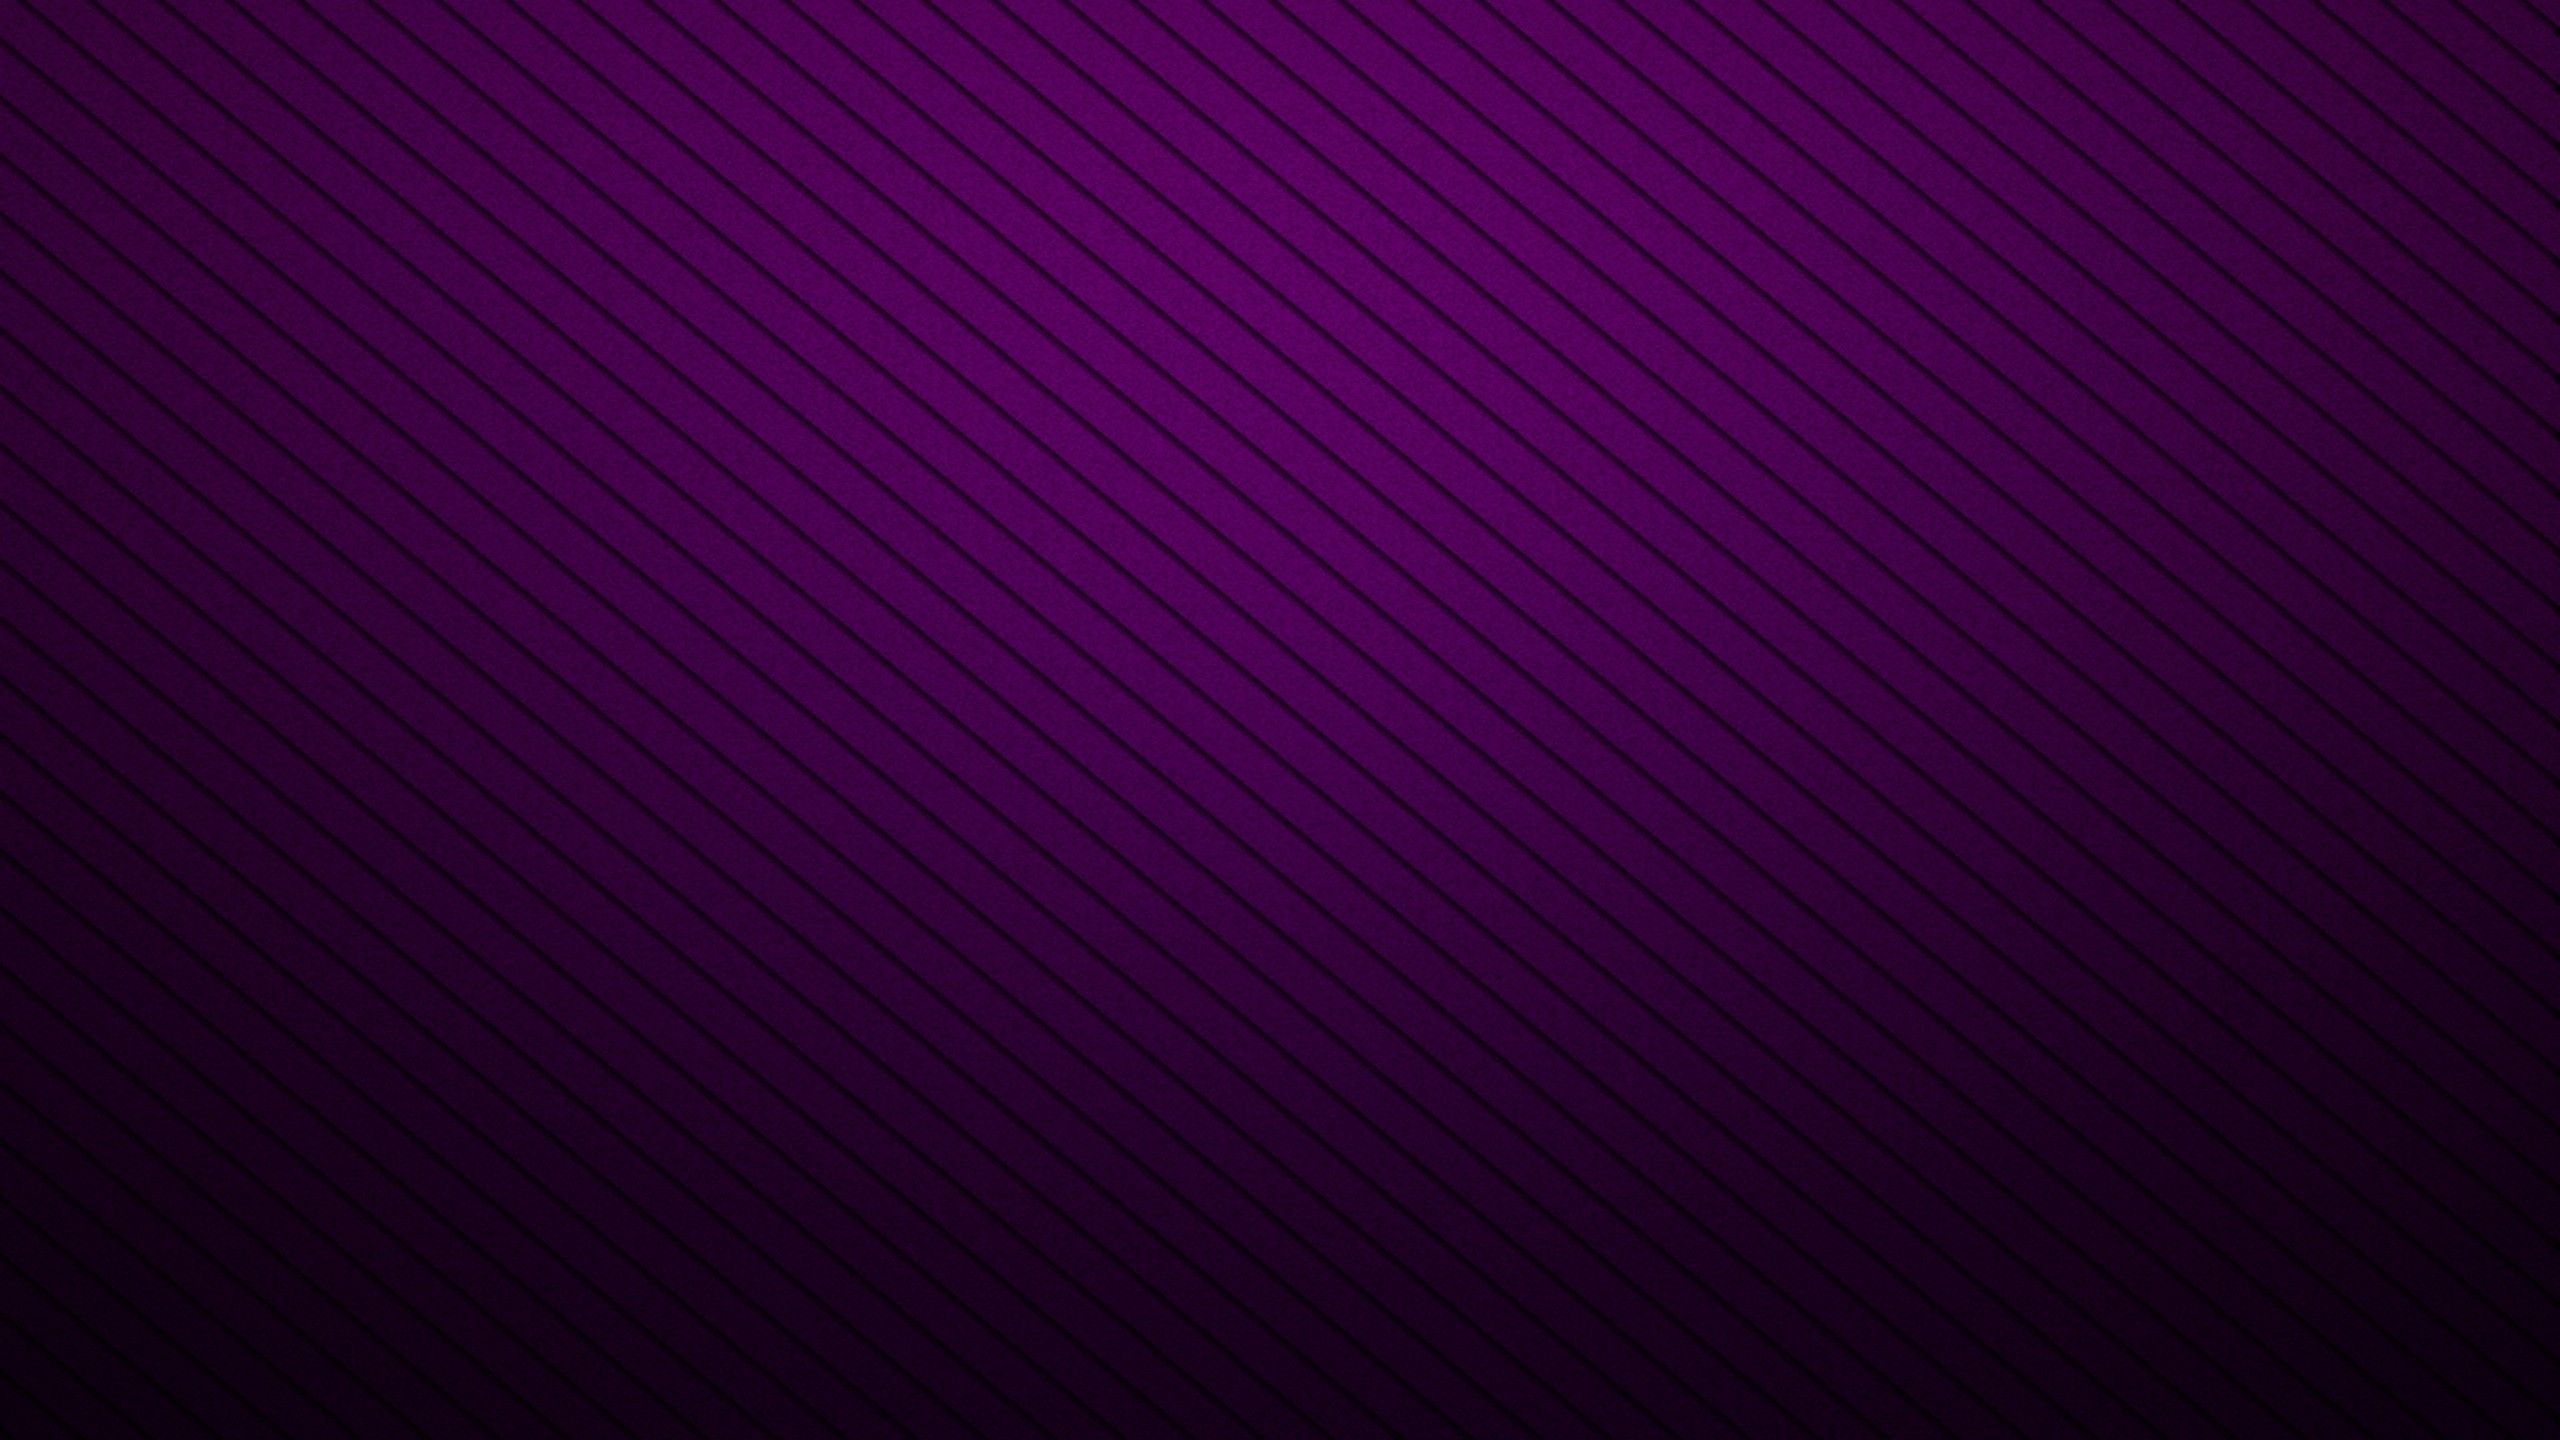 Wallpaper  ai art abstract purple simple background 3136x1792  alx   2223790  HD Wallpapers  WallHere